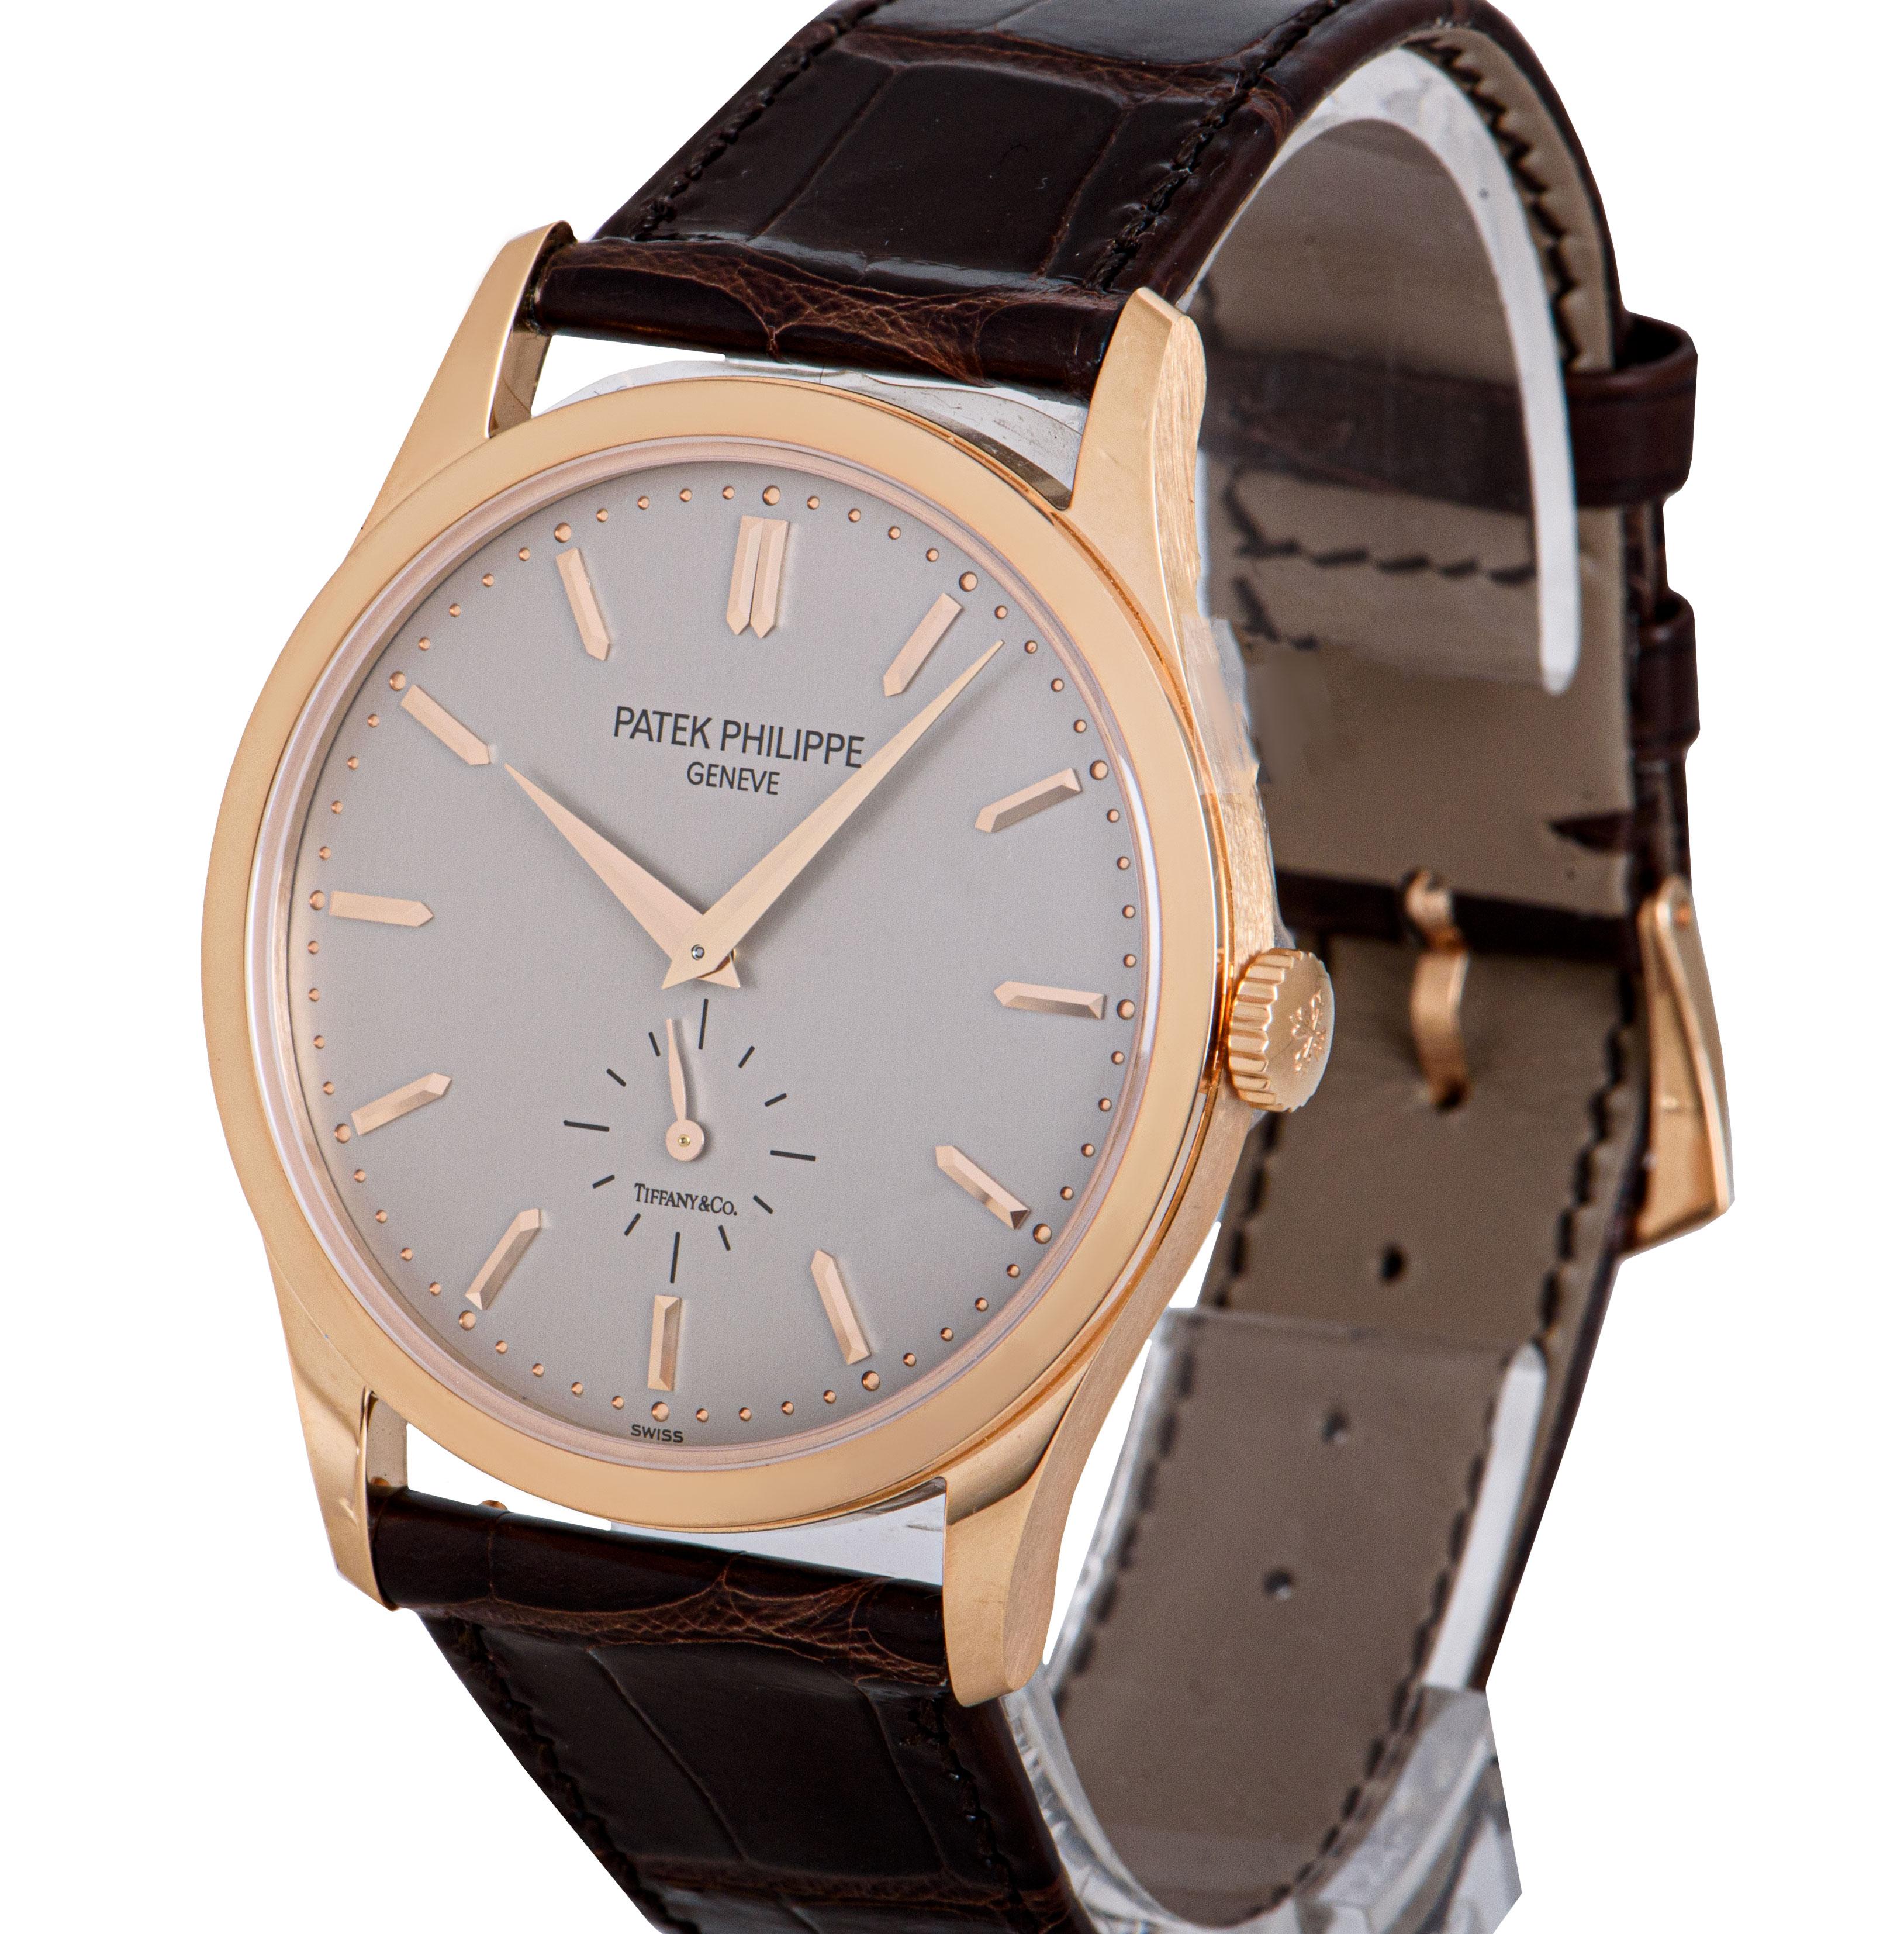 A 37 mm Unworn 18k Rose Gold Calatrava Gents Wristwatch, double name Tiffany & Co. silvery gray dial with applied hour markers, small seconds at 6 0'clock, a fixed 18k rose gold bezel, an original chocolate brown leather strap with an original 18k